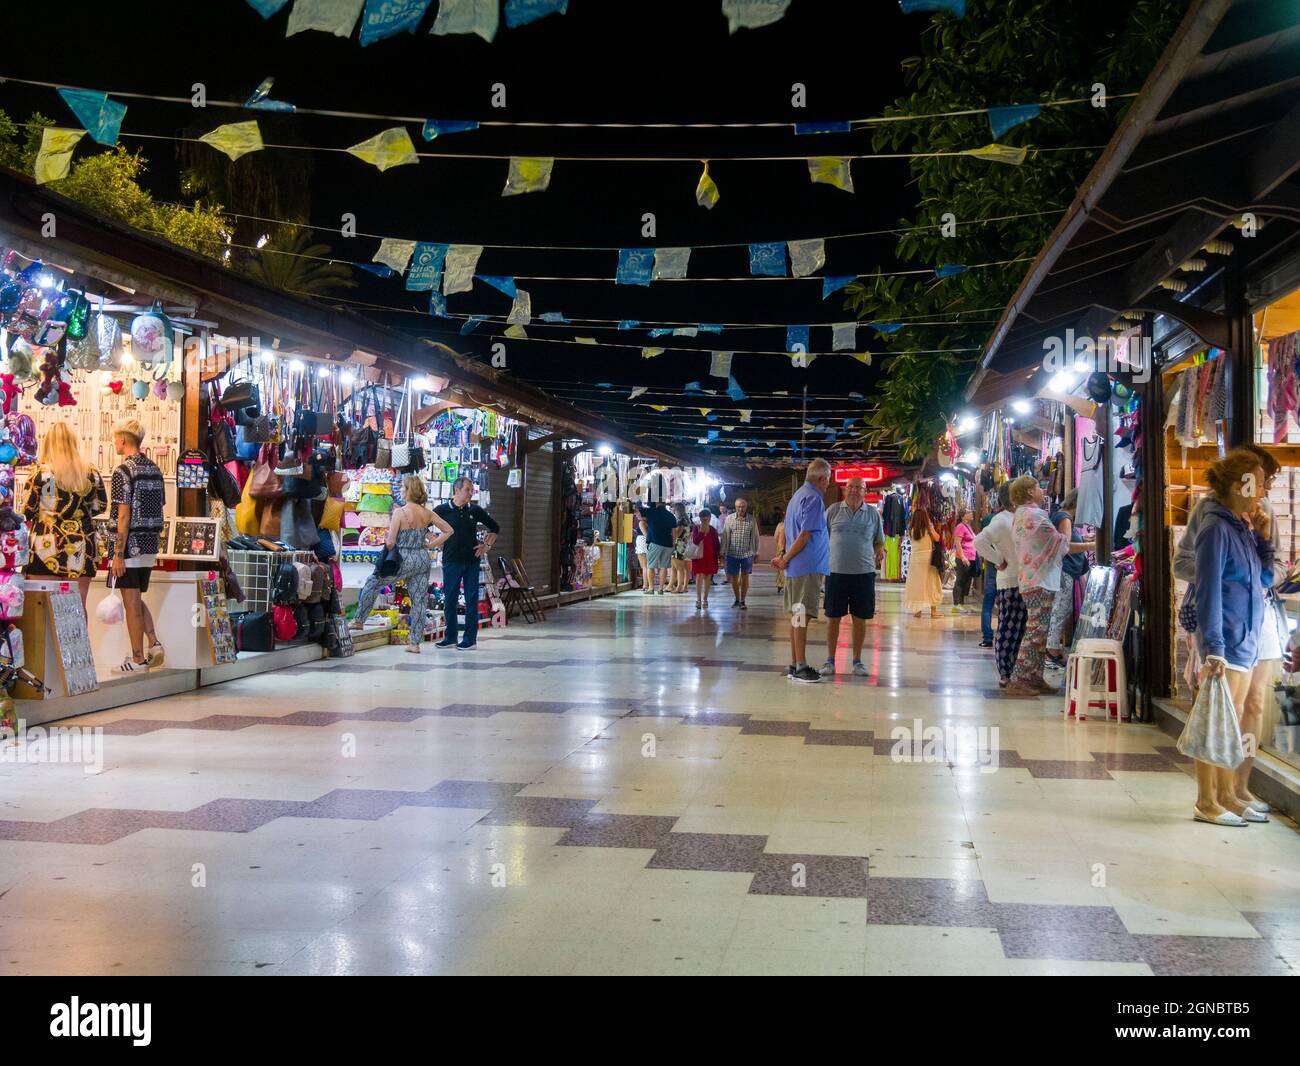 People browsing the market stalls on the seafront of Torrevieja at night, Costa Blanca, Spain. Stock Photo